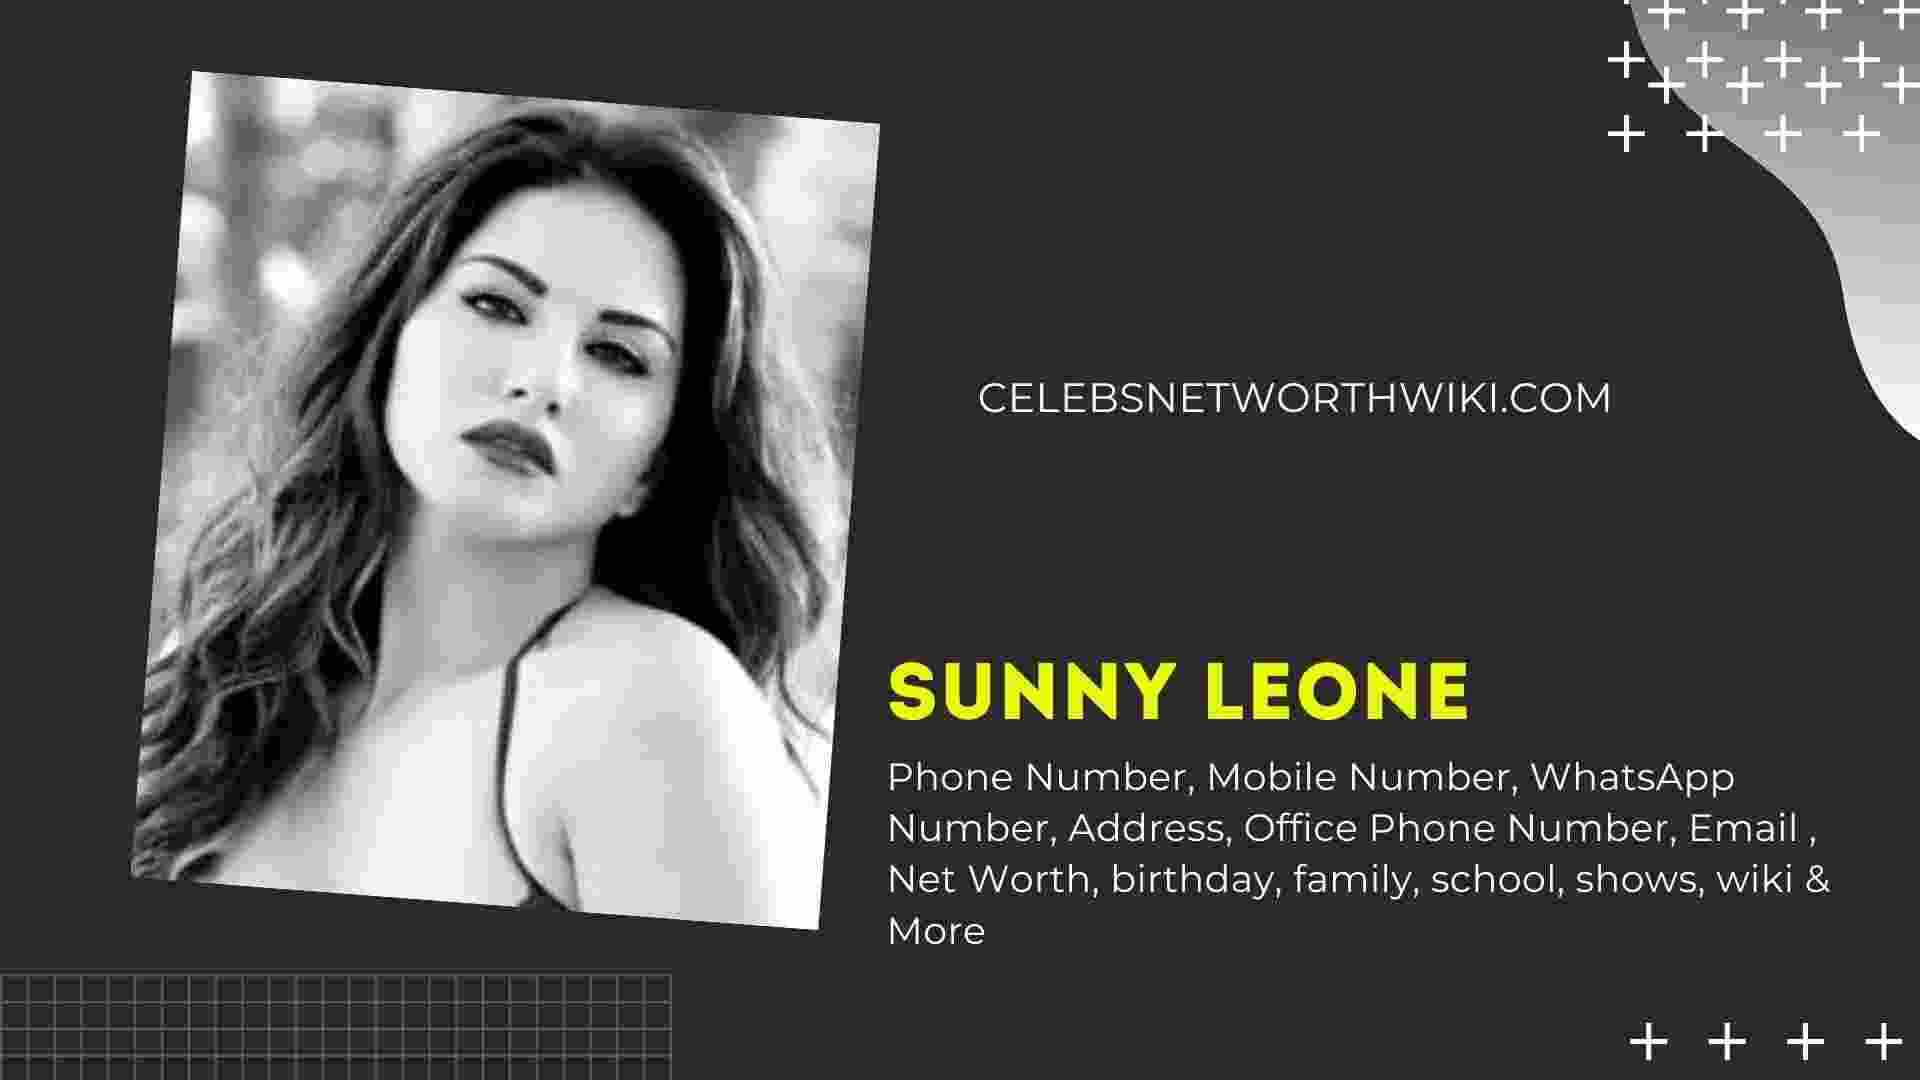 Sunny Leone Phone Number Whatsapp Number Contact Num Mobile What is sunny leon`s personal phone number? sunny leone phone number whatsapp